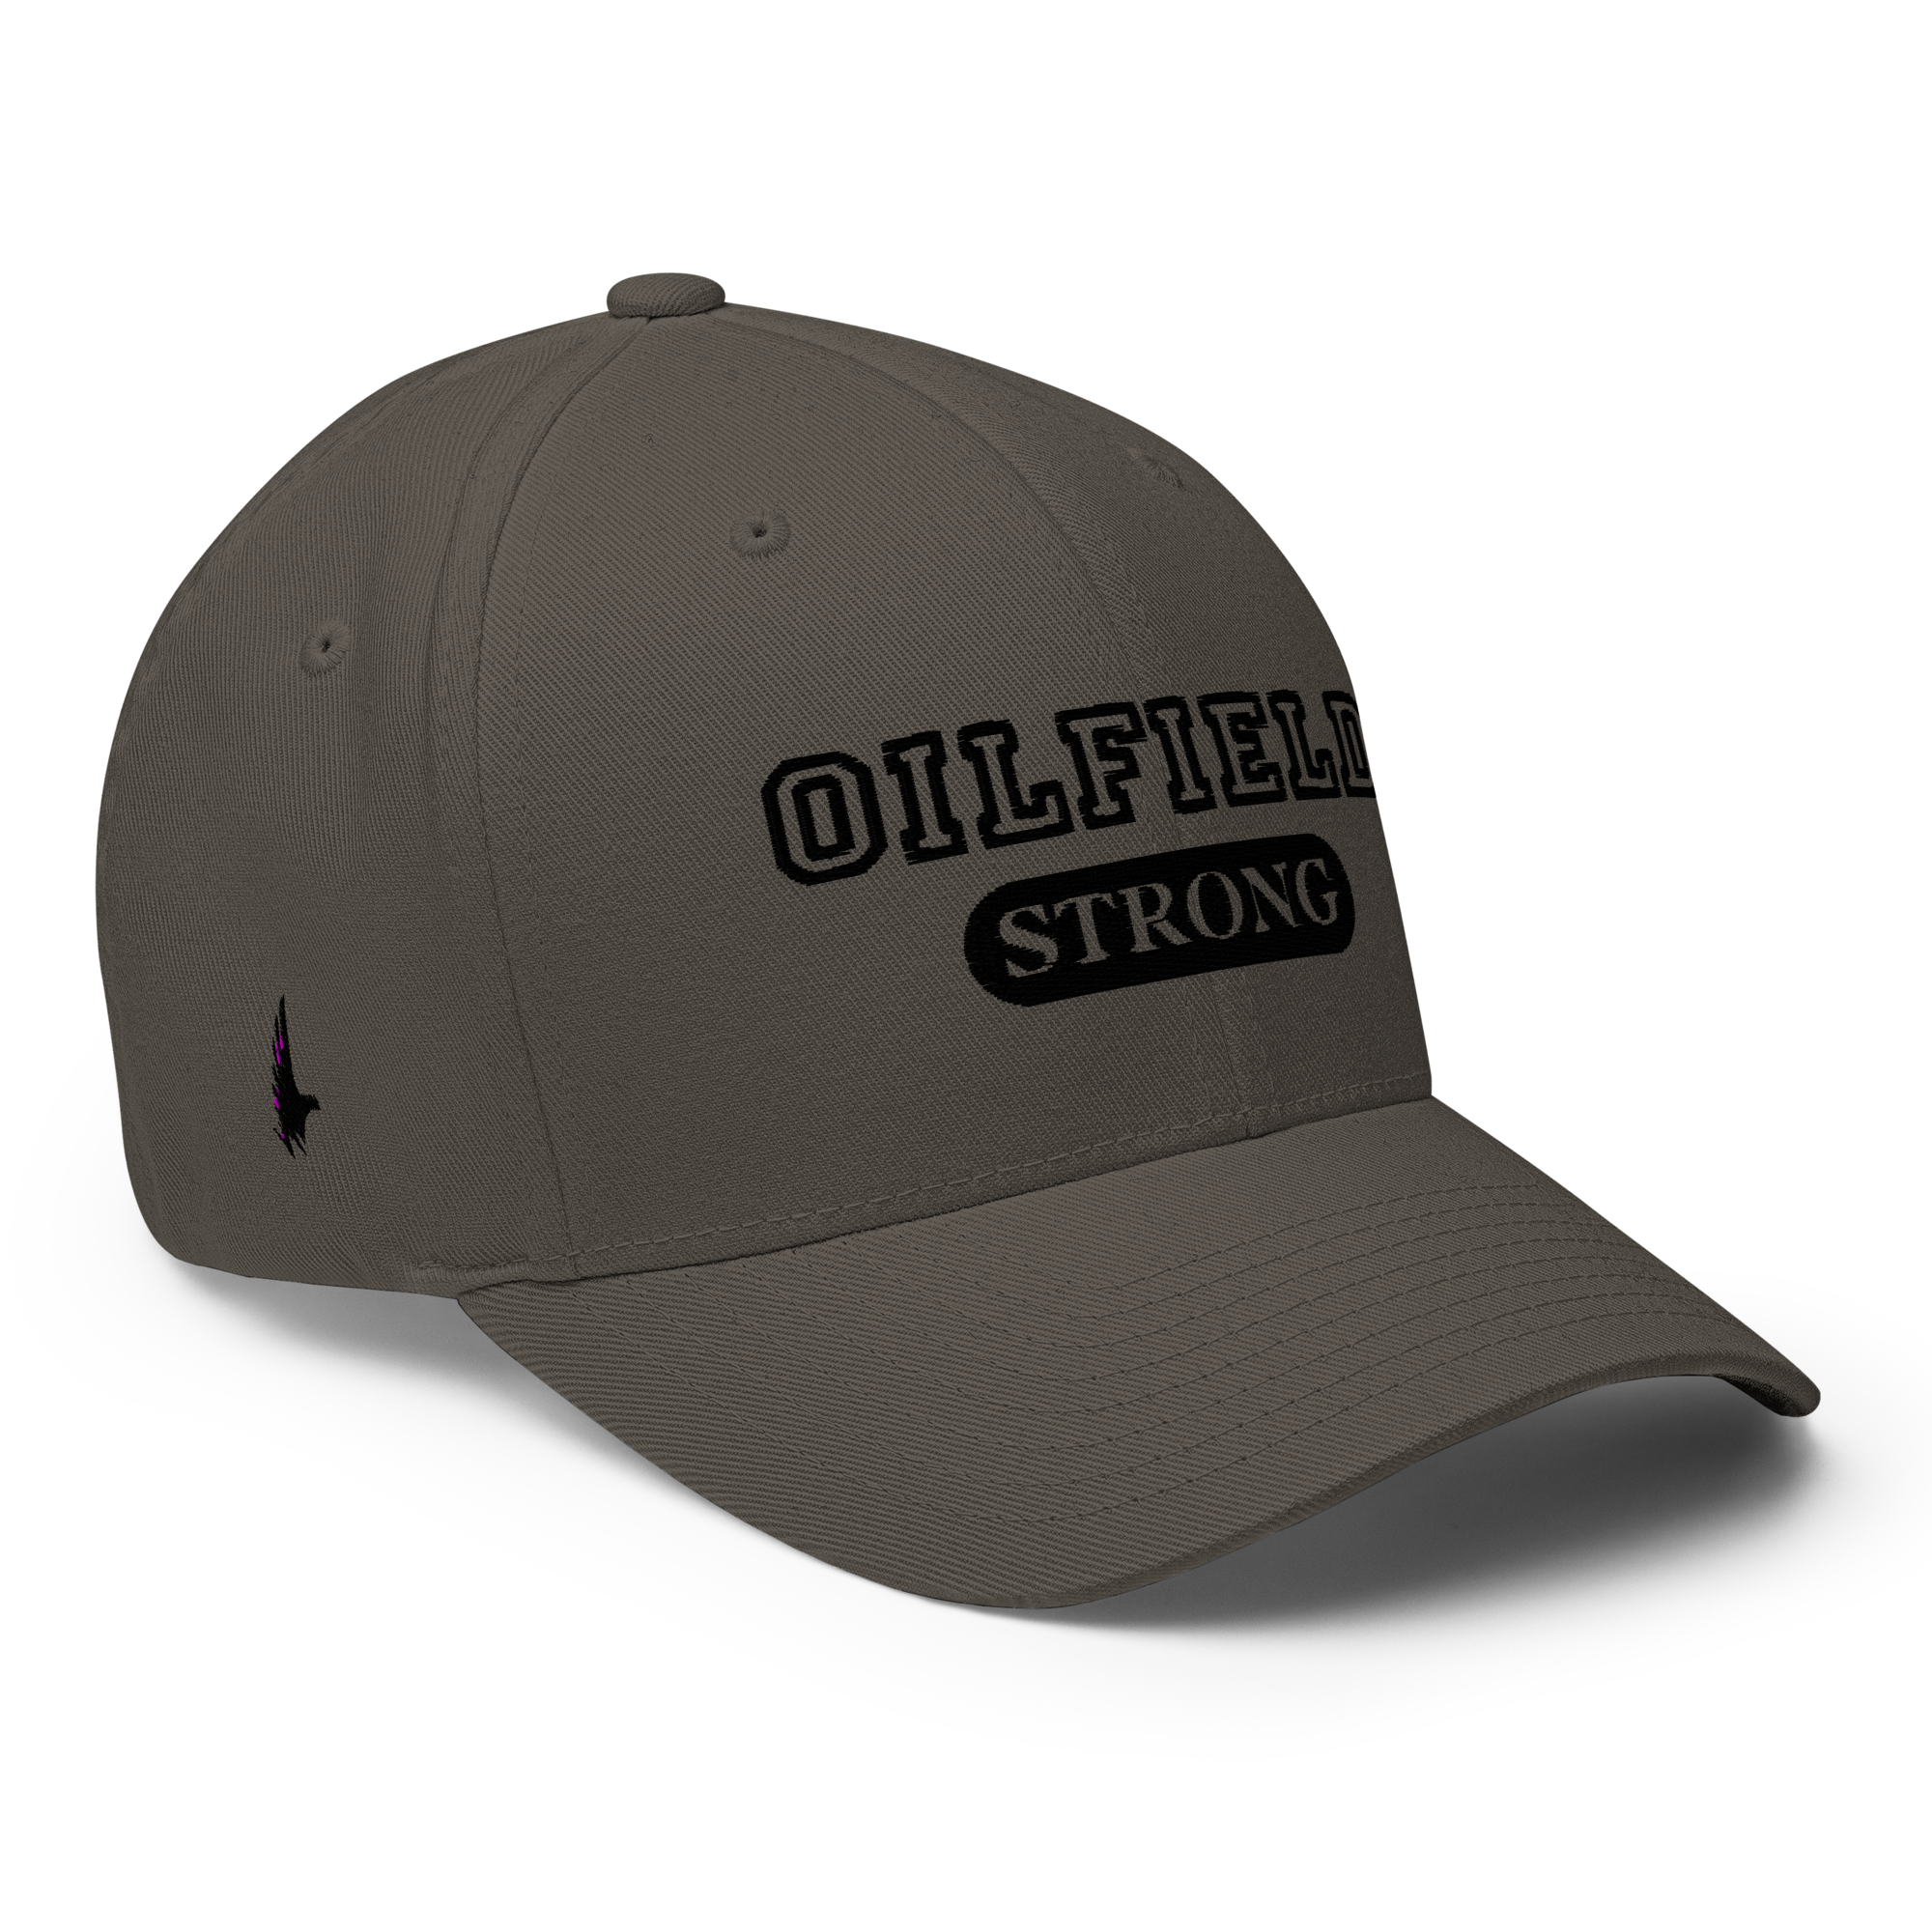 Oilfield Strong Fitted Hat Charcoal Grey Black - Loyalty Vibes